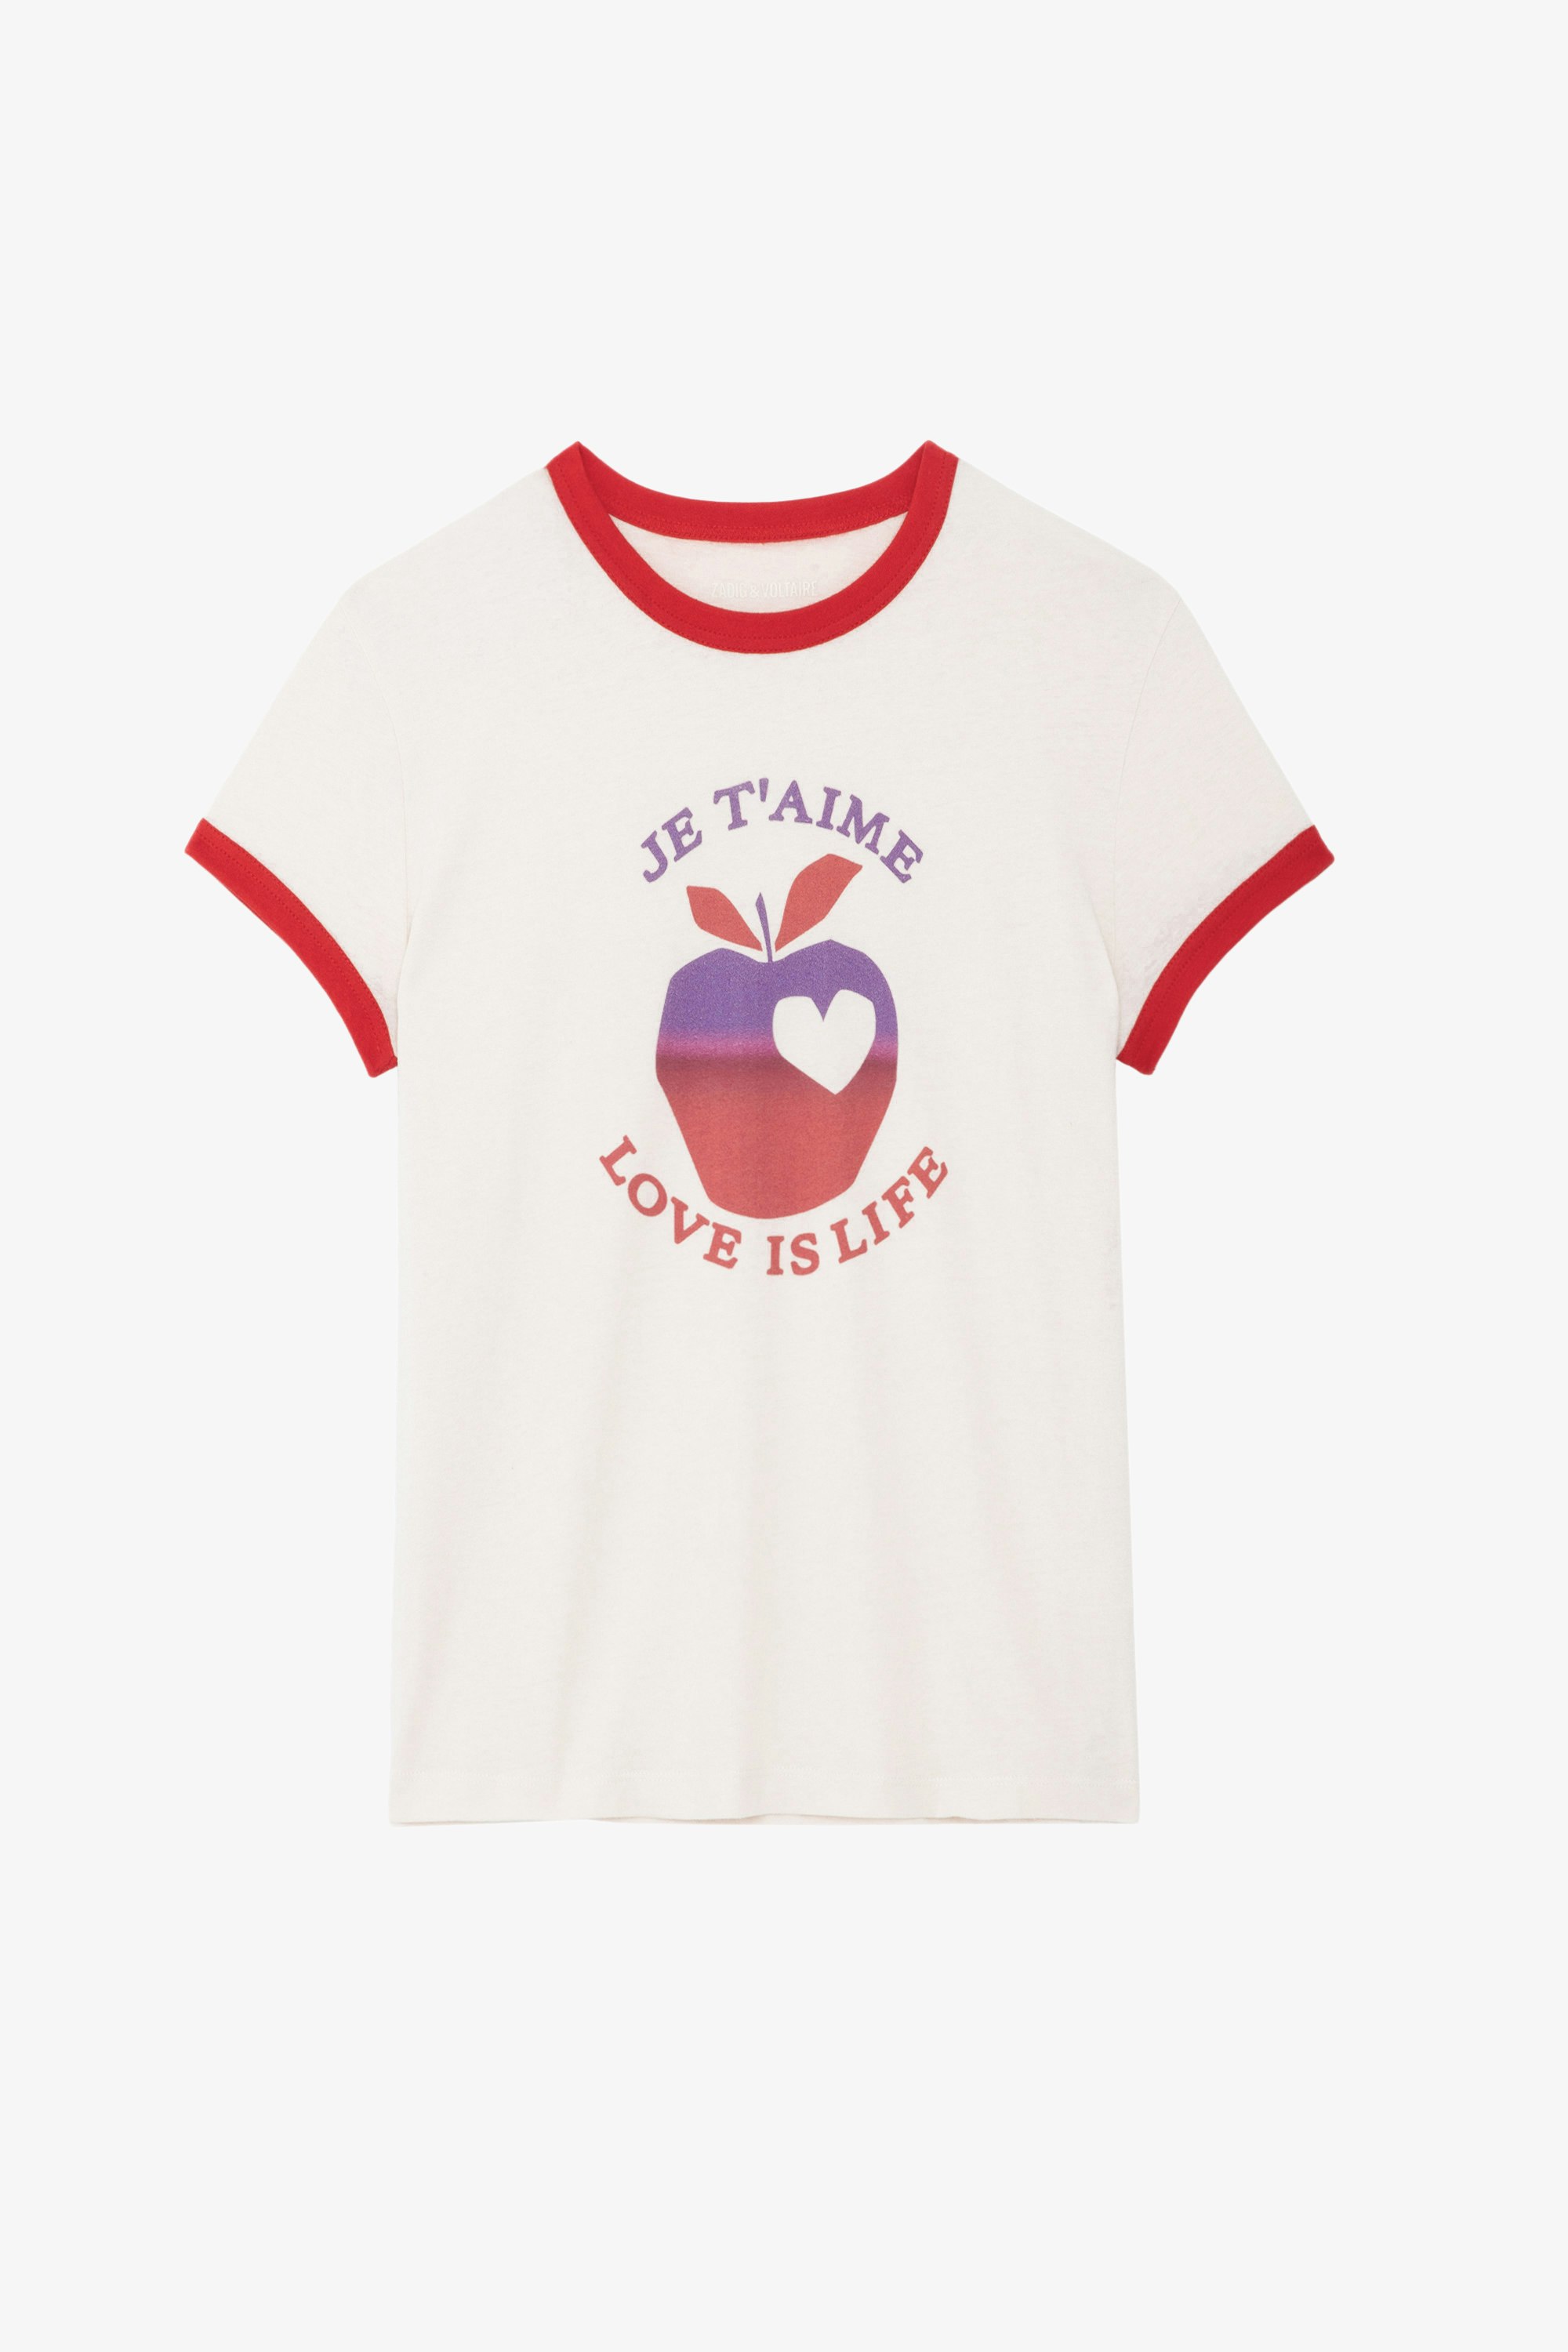 Walk Love Is Life T-shirt - Light pink round-neck T-shirt with short sleeves, motifs and contrasting trim.